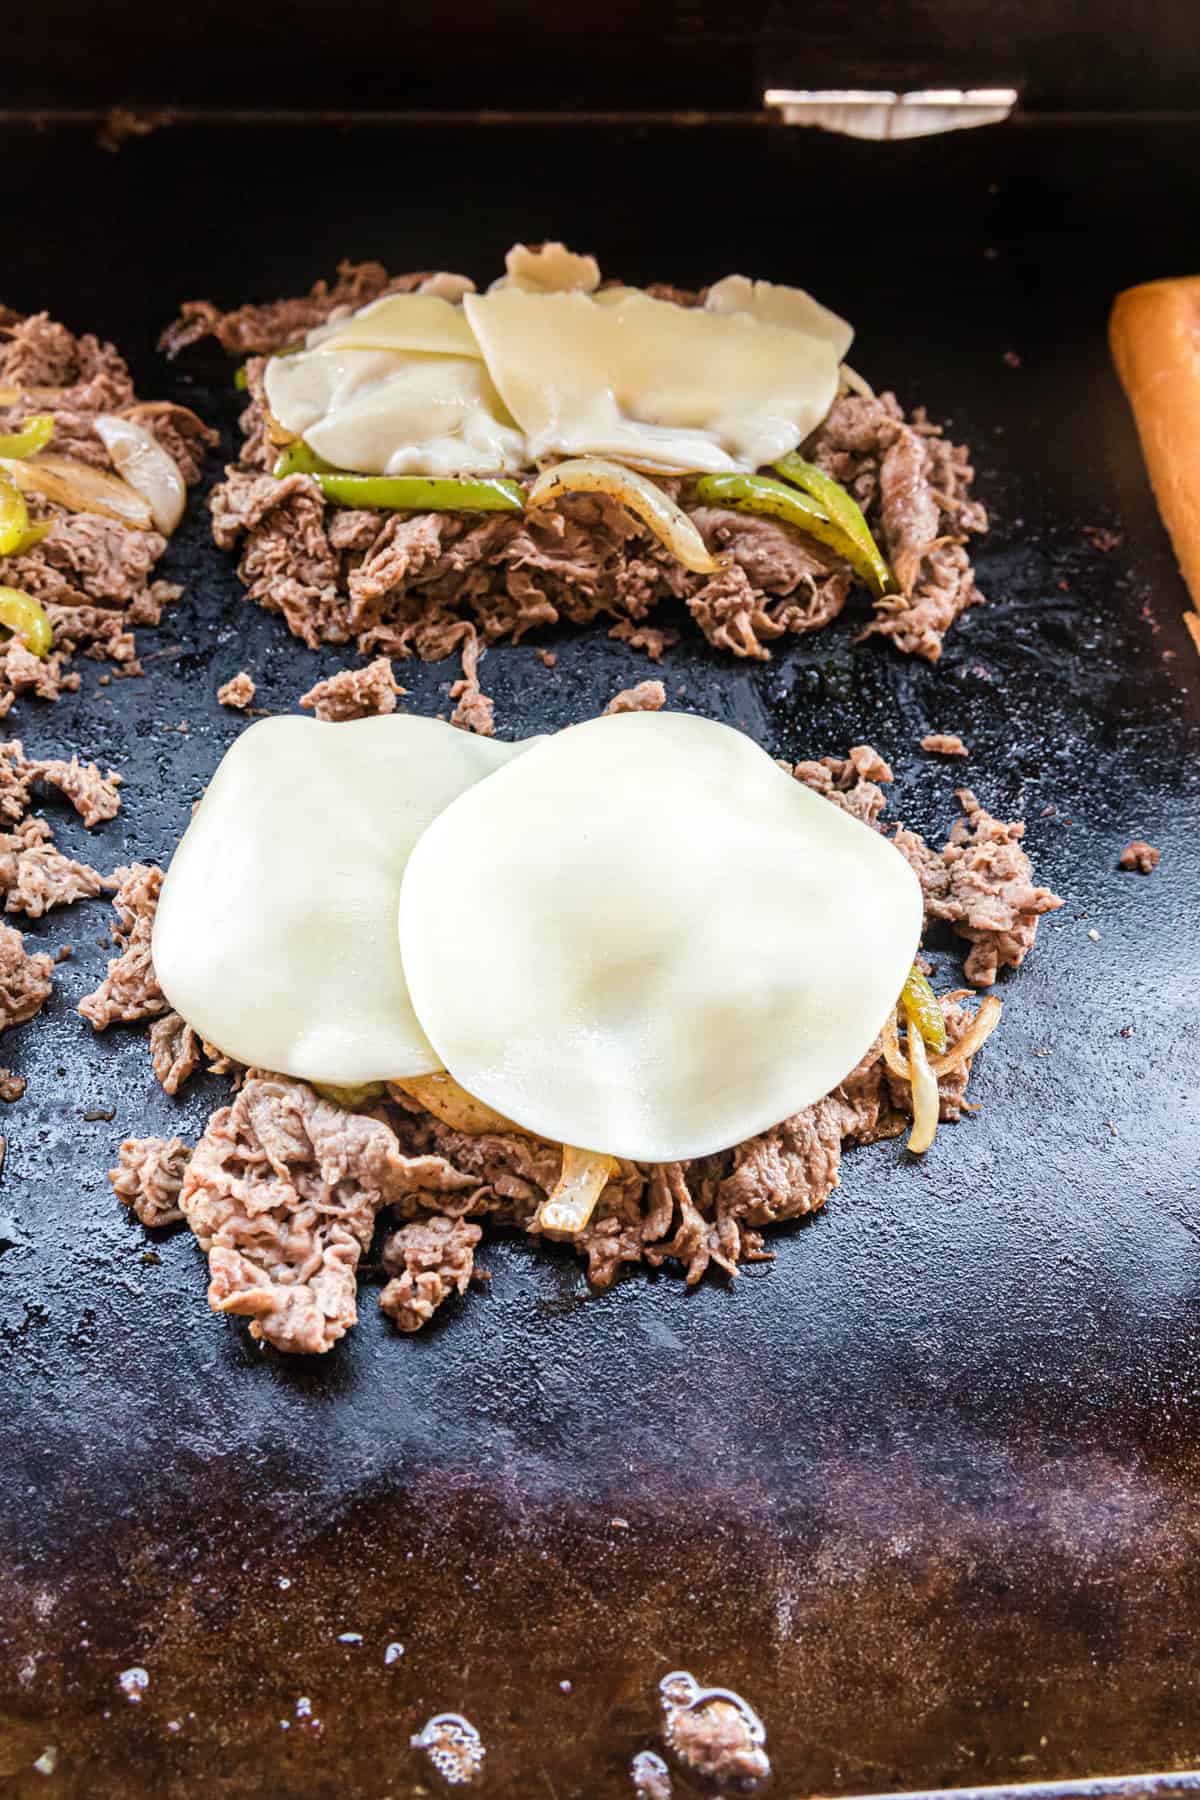 Topping steak and vegetables with provolone cheese for Philly Cheesesteak Blackstone recipe